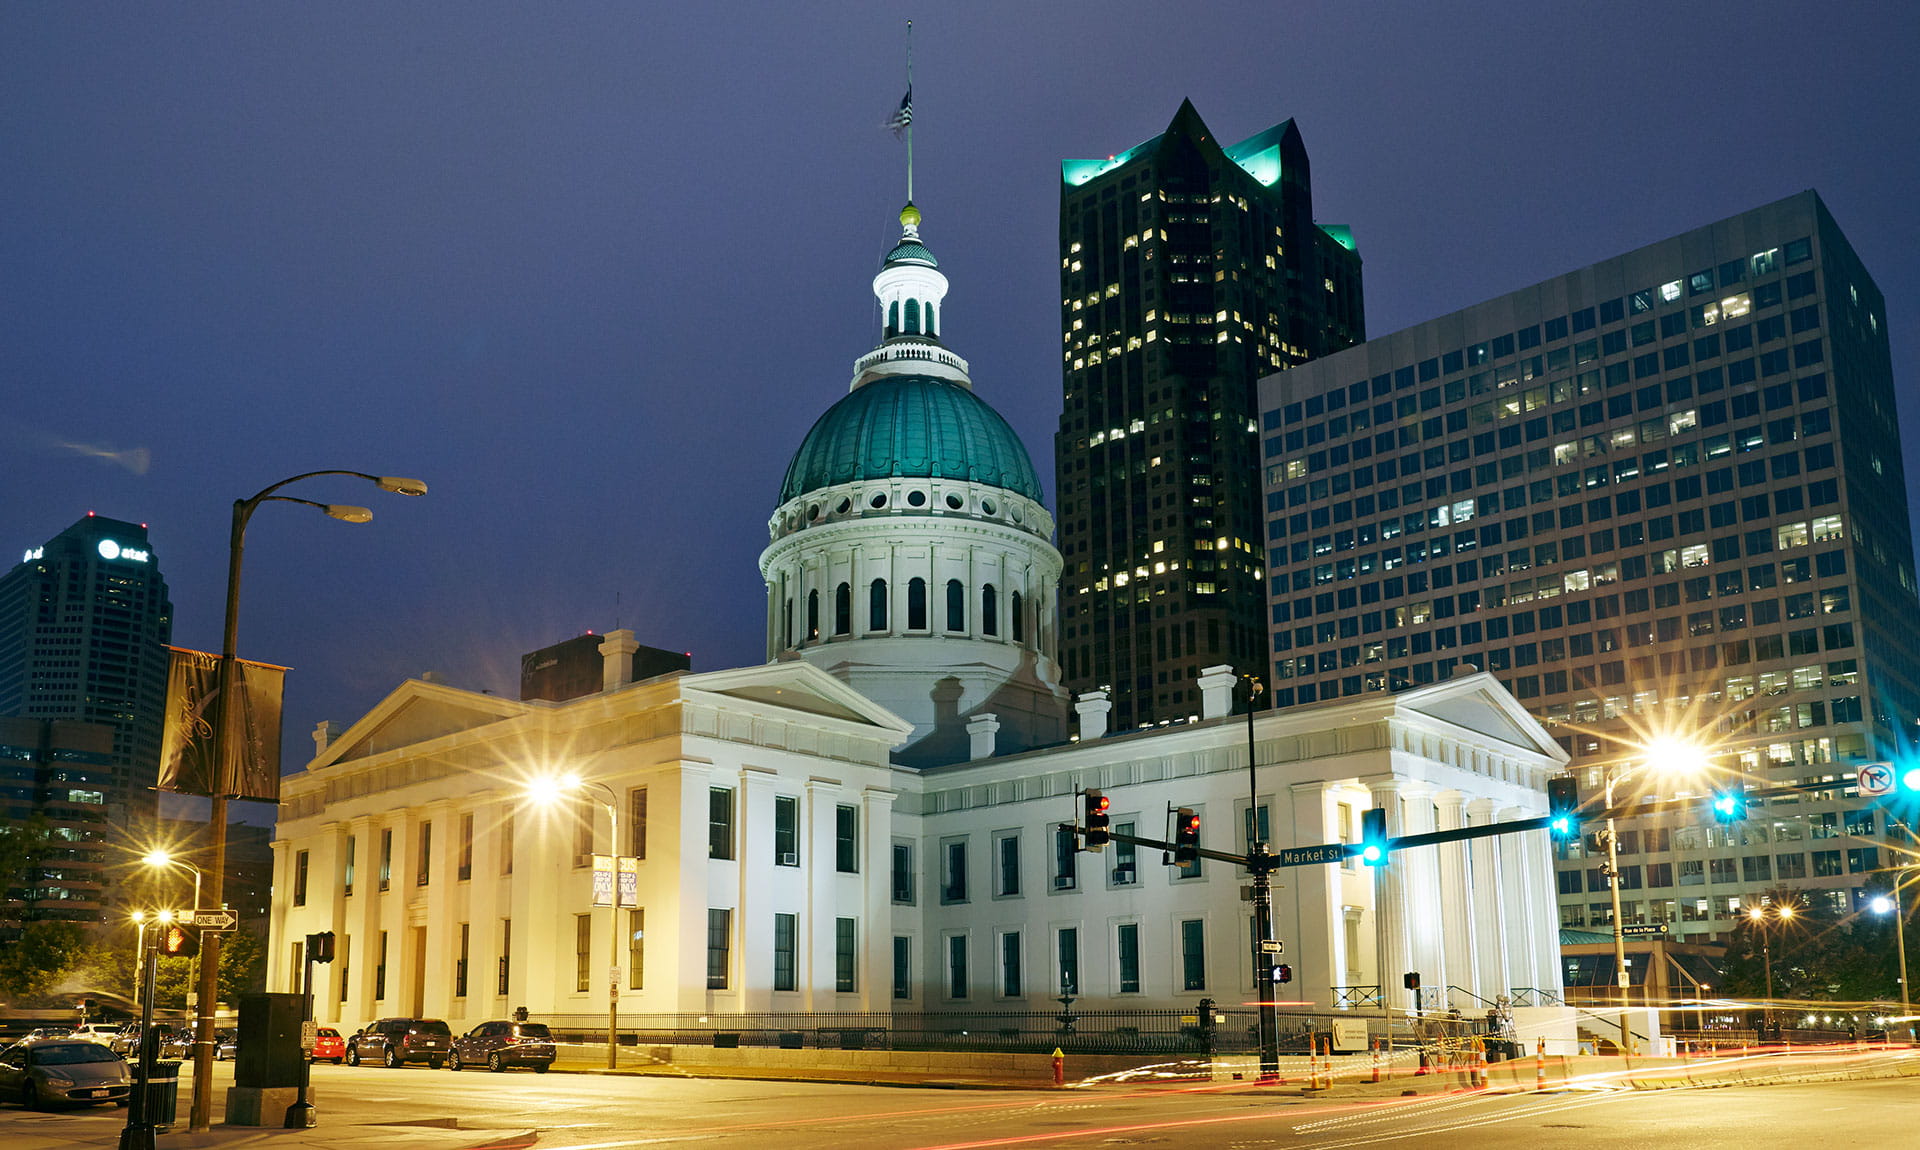 Old Courthouse, St. Louis at Night